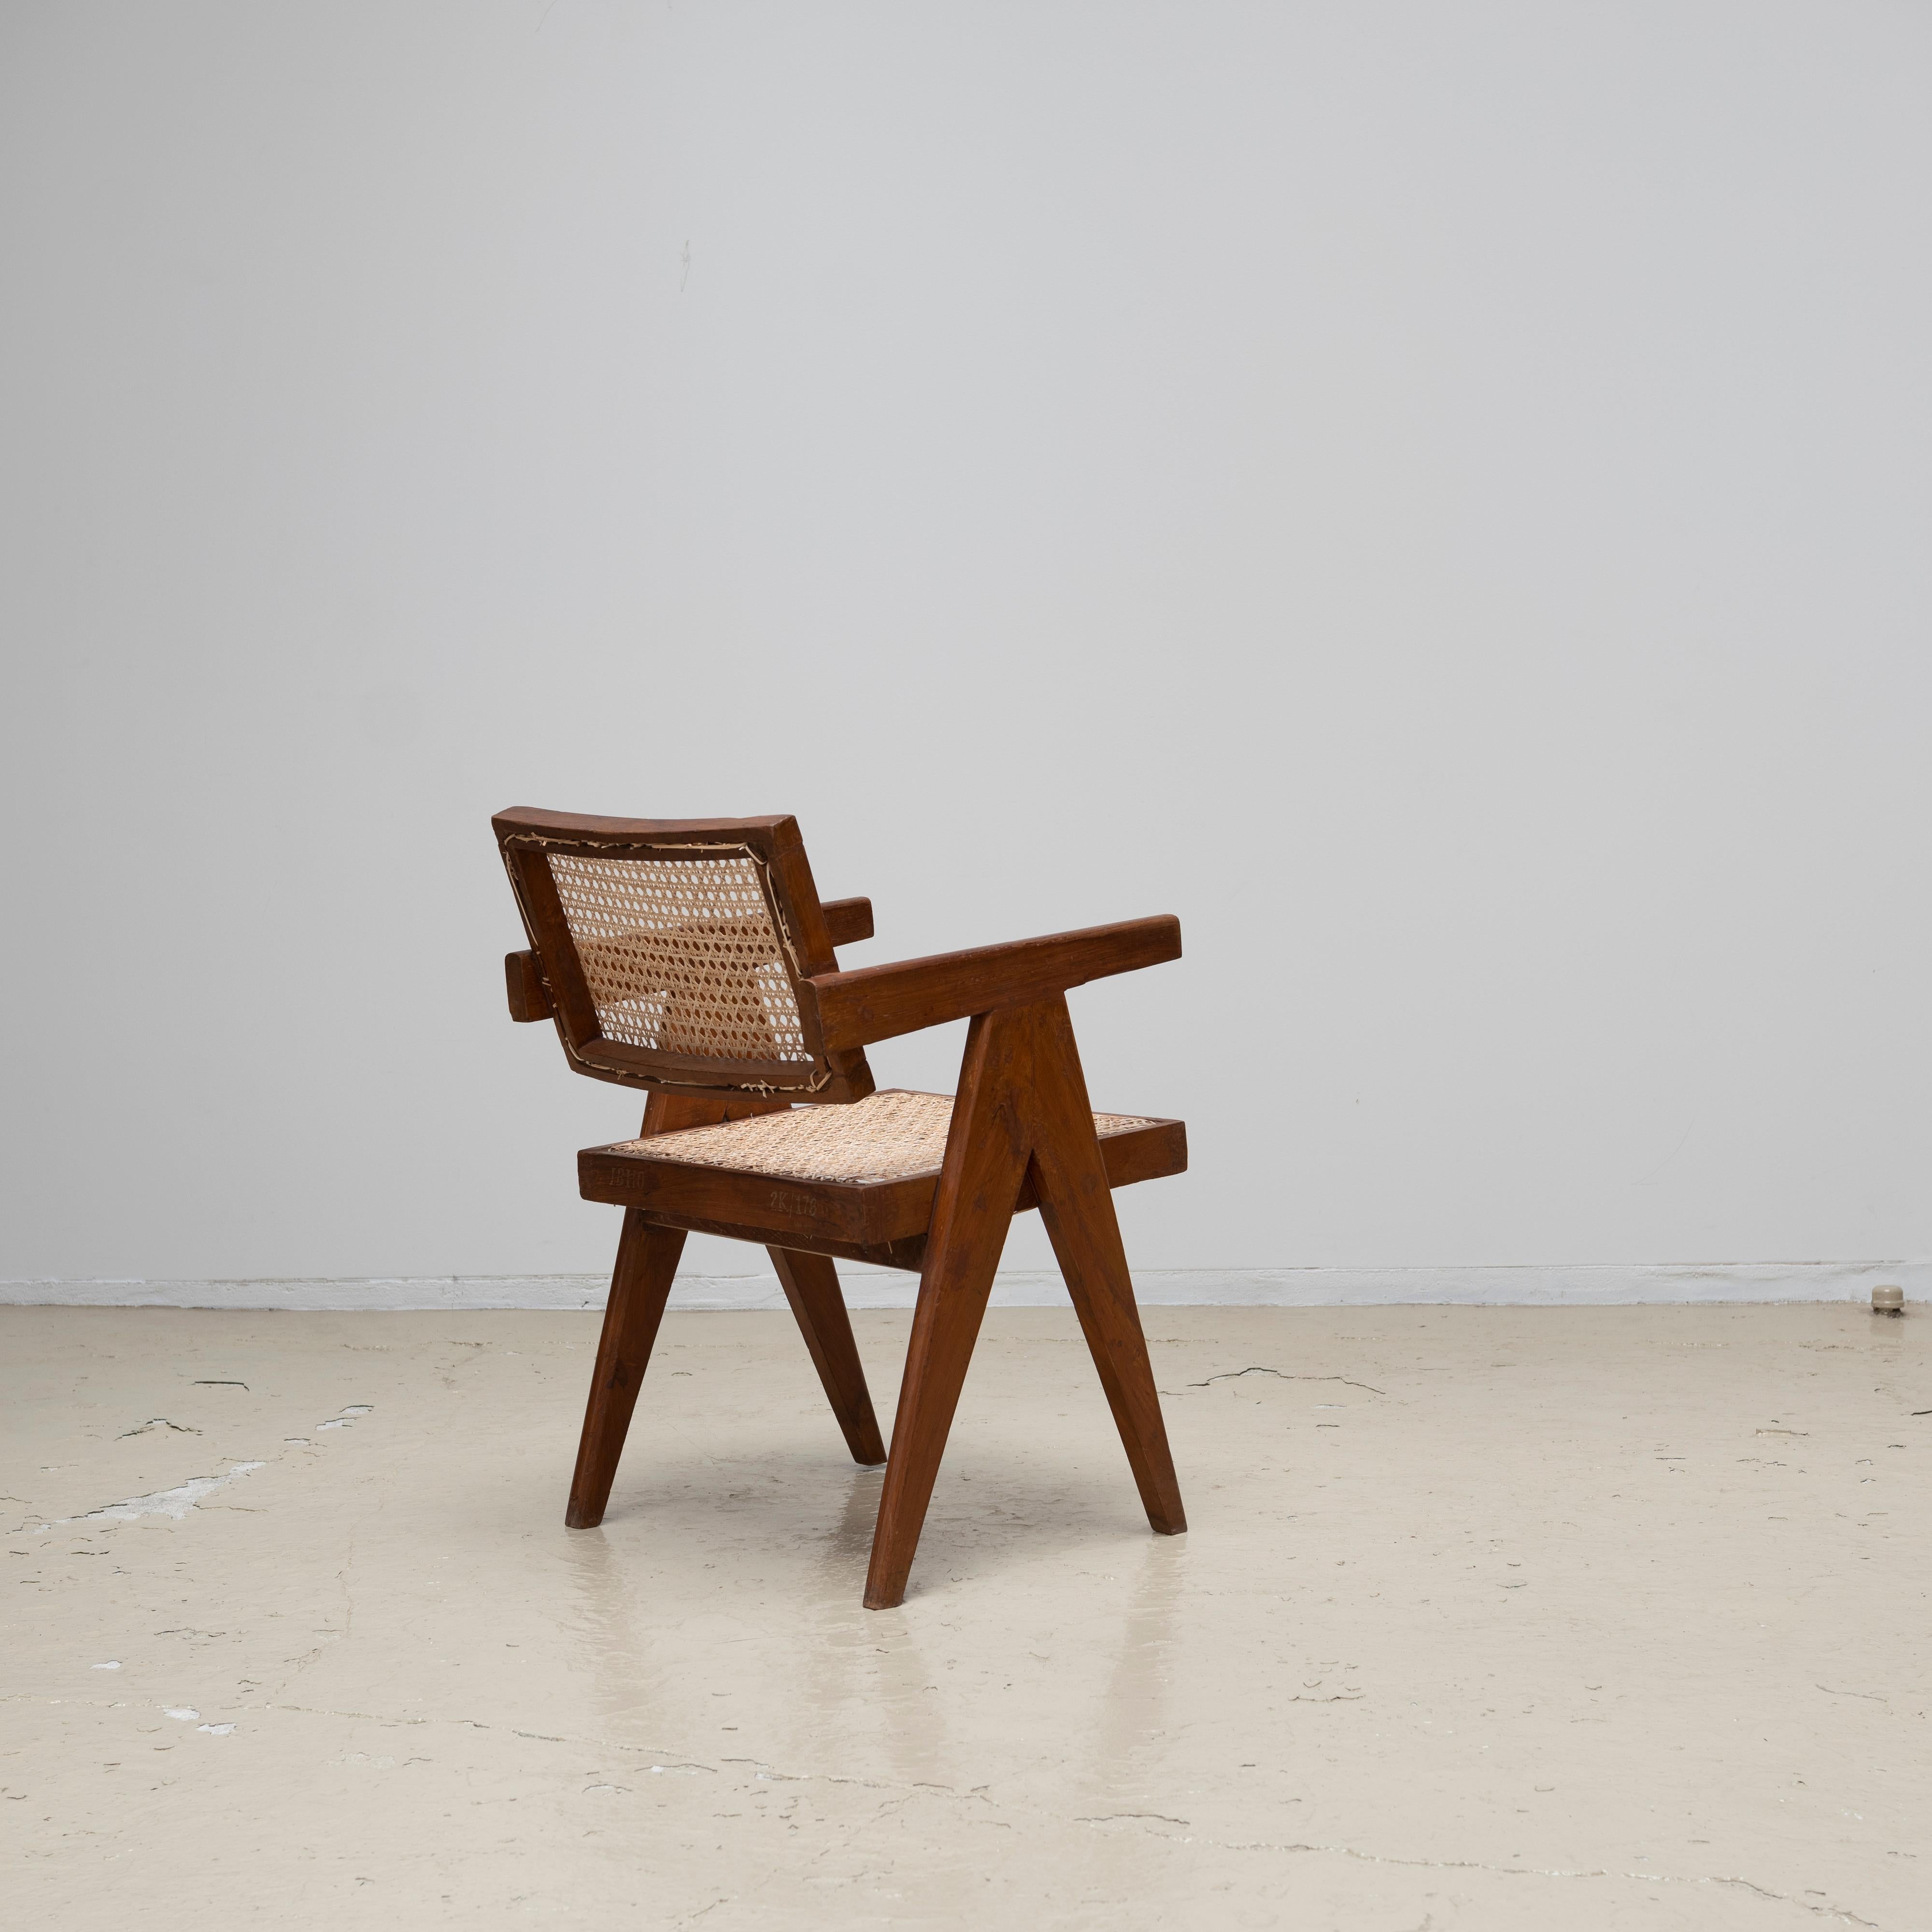 Indian Pierre Jeanneret Office Chair, Circa 1955-56, Chandigarh, India For Sale